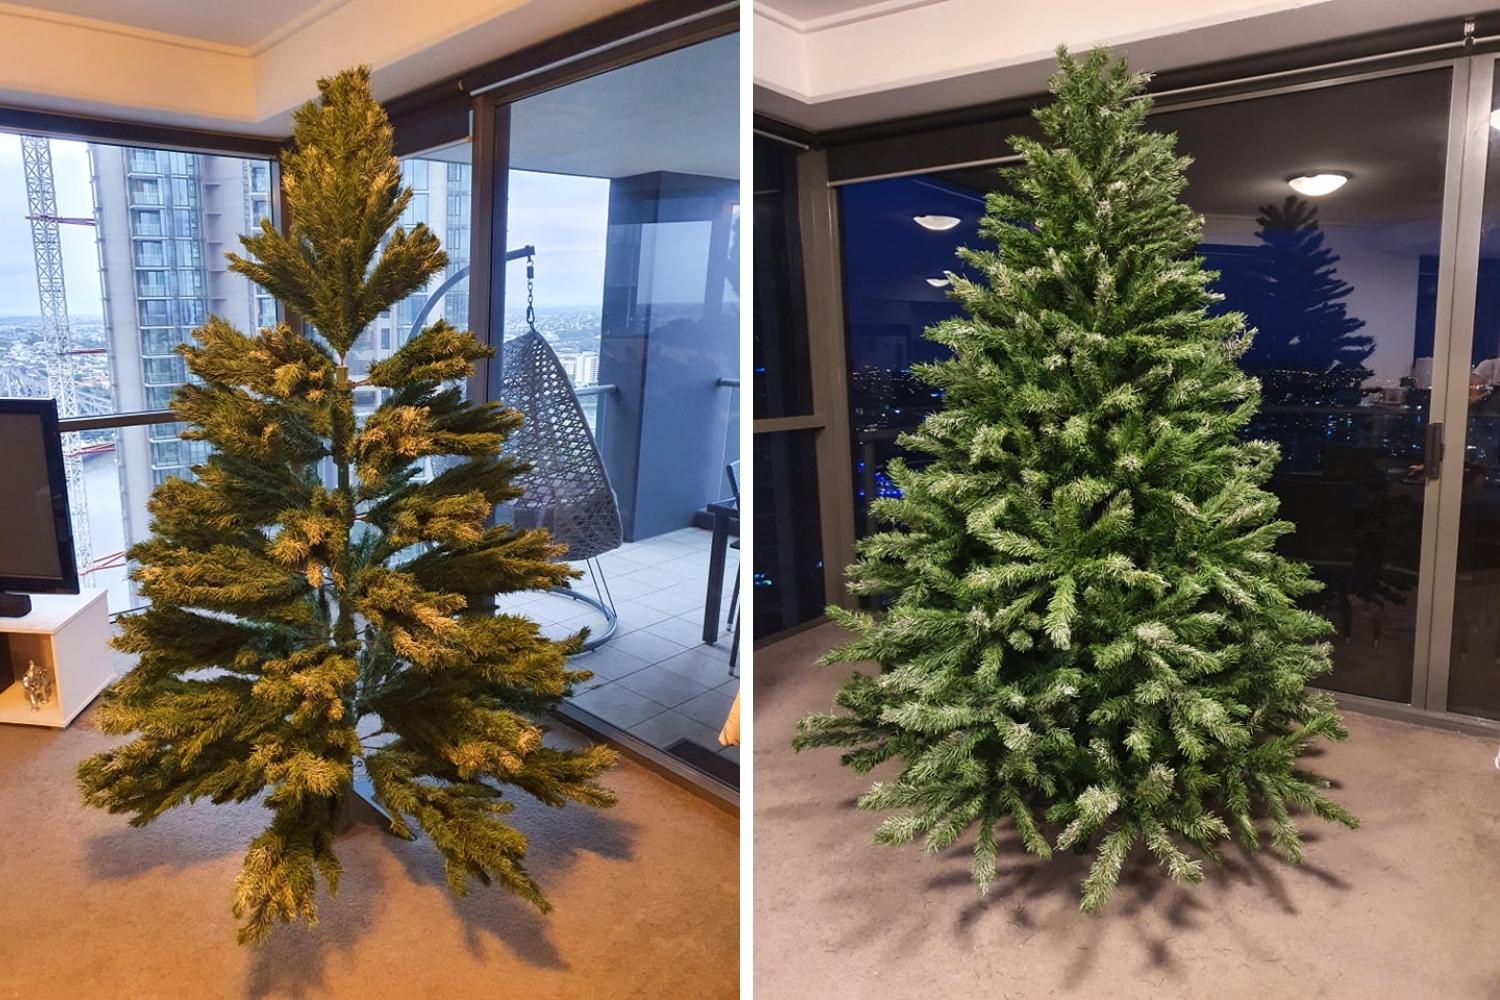 How to fluff a Christmas tree - 6 easy tips to follow